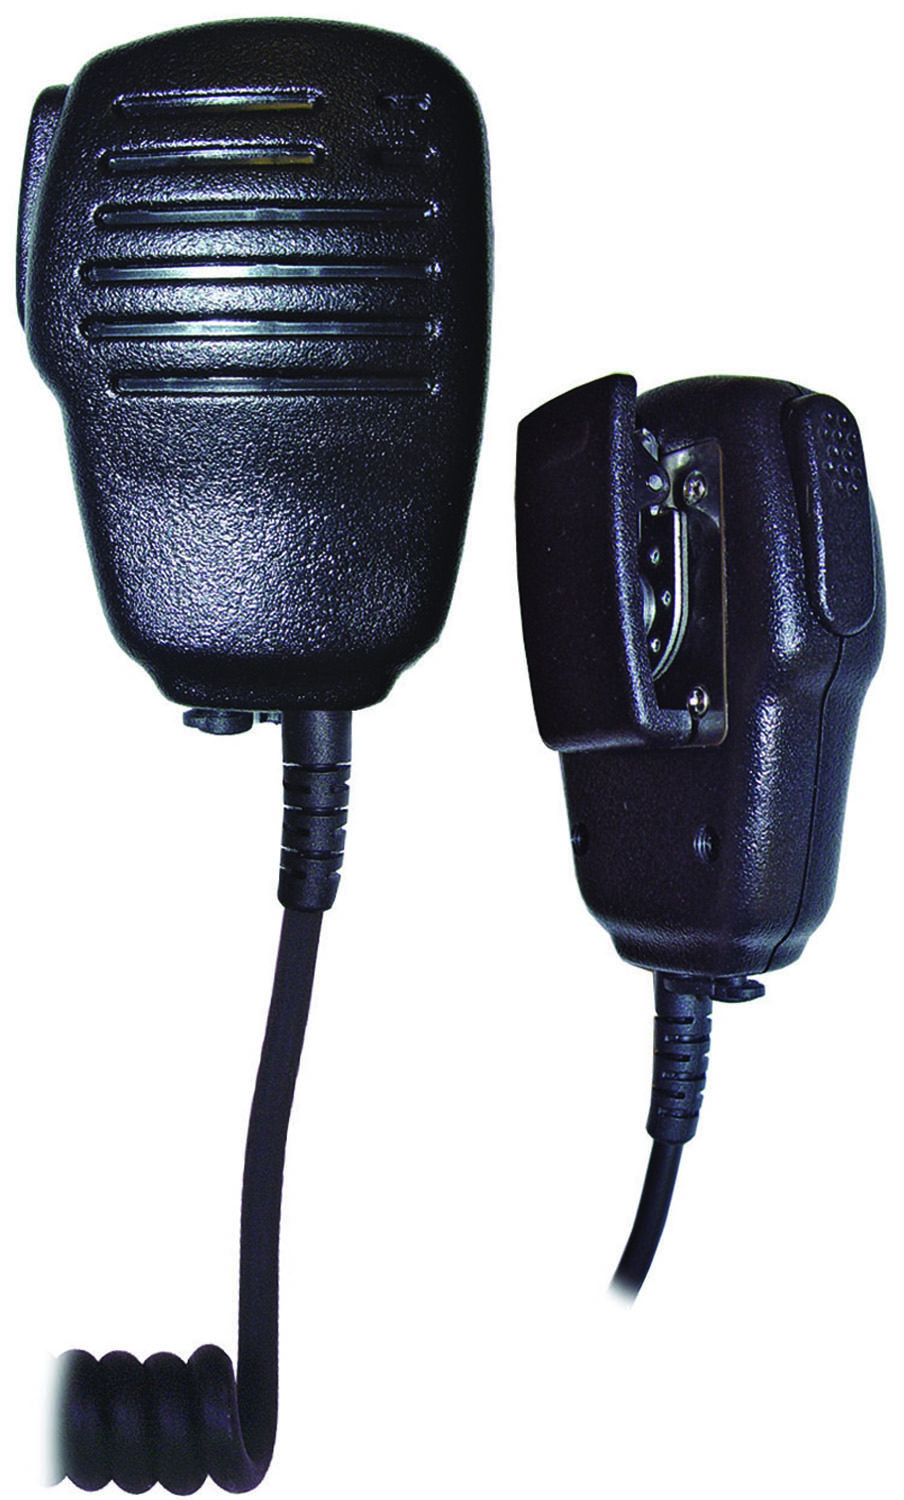 KLEIN COMPACT LAPEL MICROPHONE WIRED FOR MIDLAND GXT SERIES FRS RADIOS